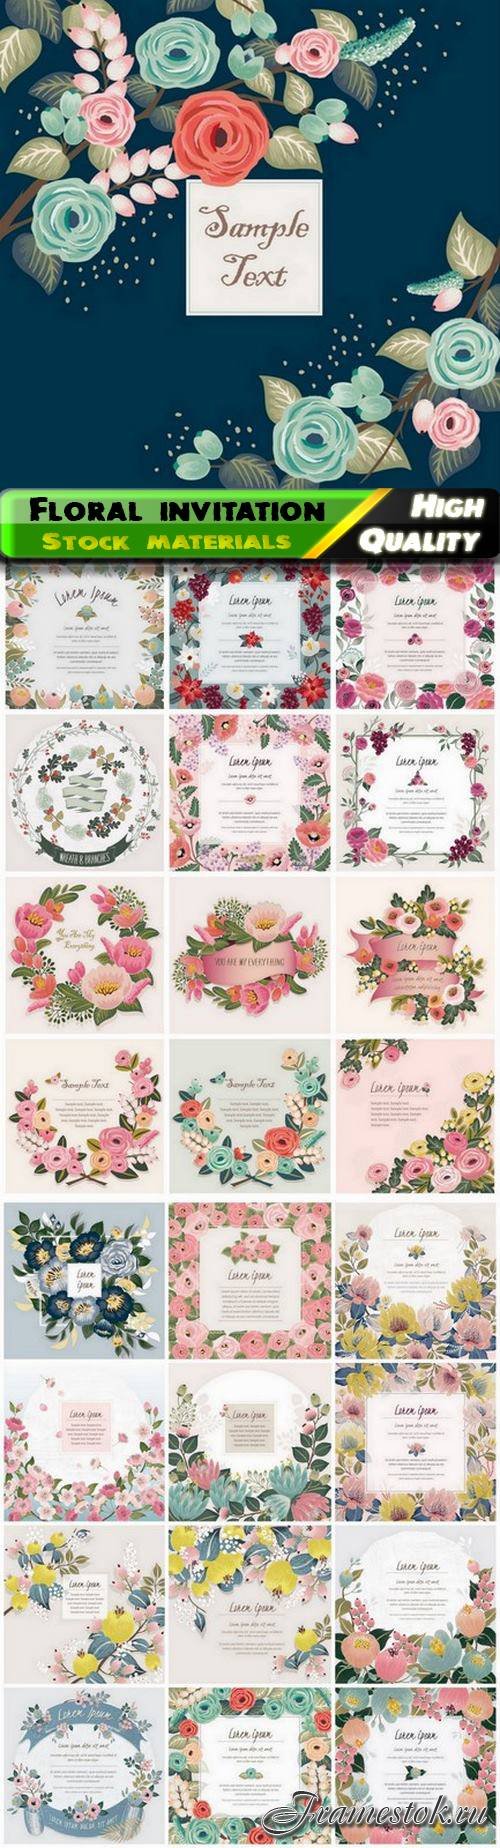 Floral wedding invitation card with wild flowers and leaves 25 Eps